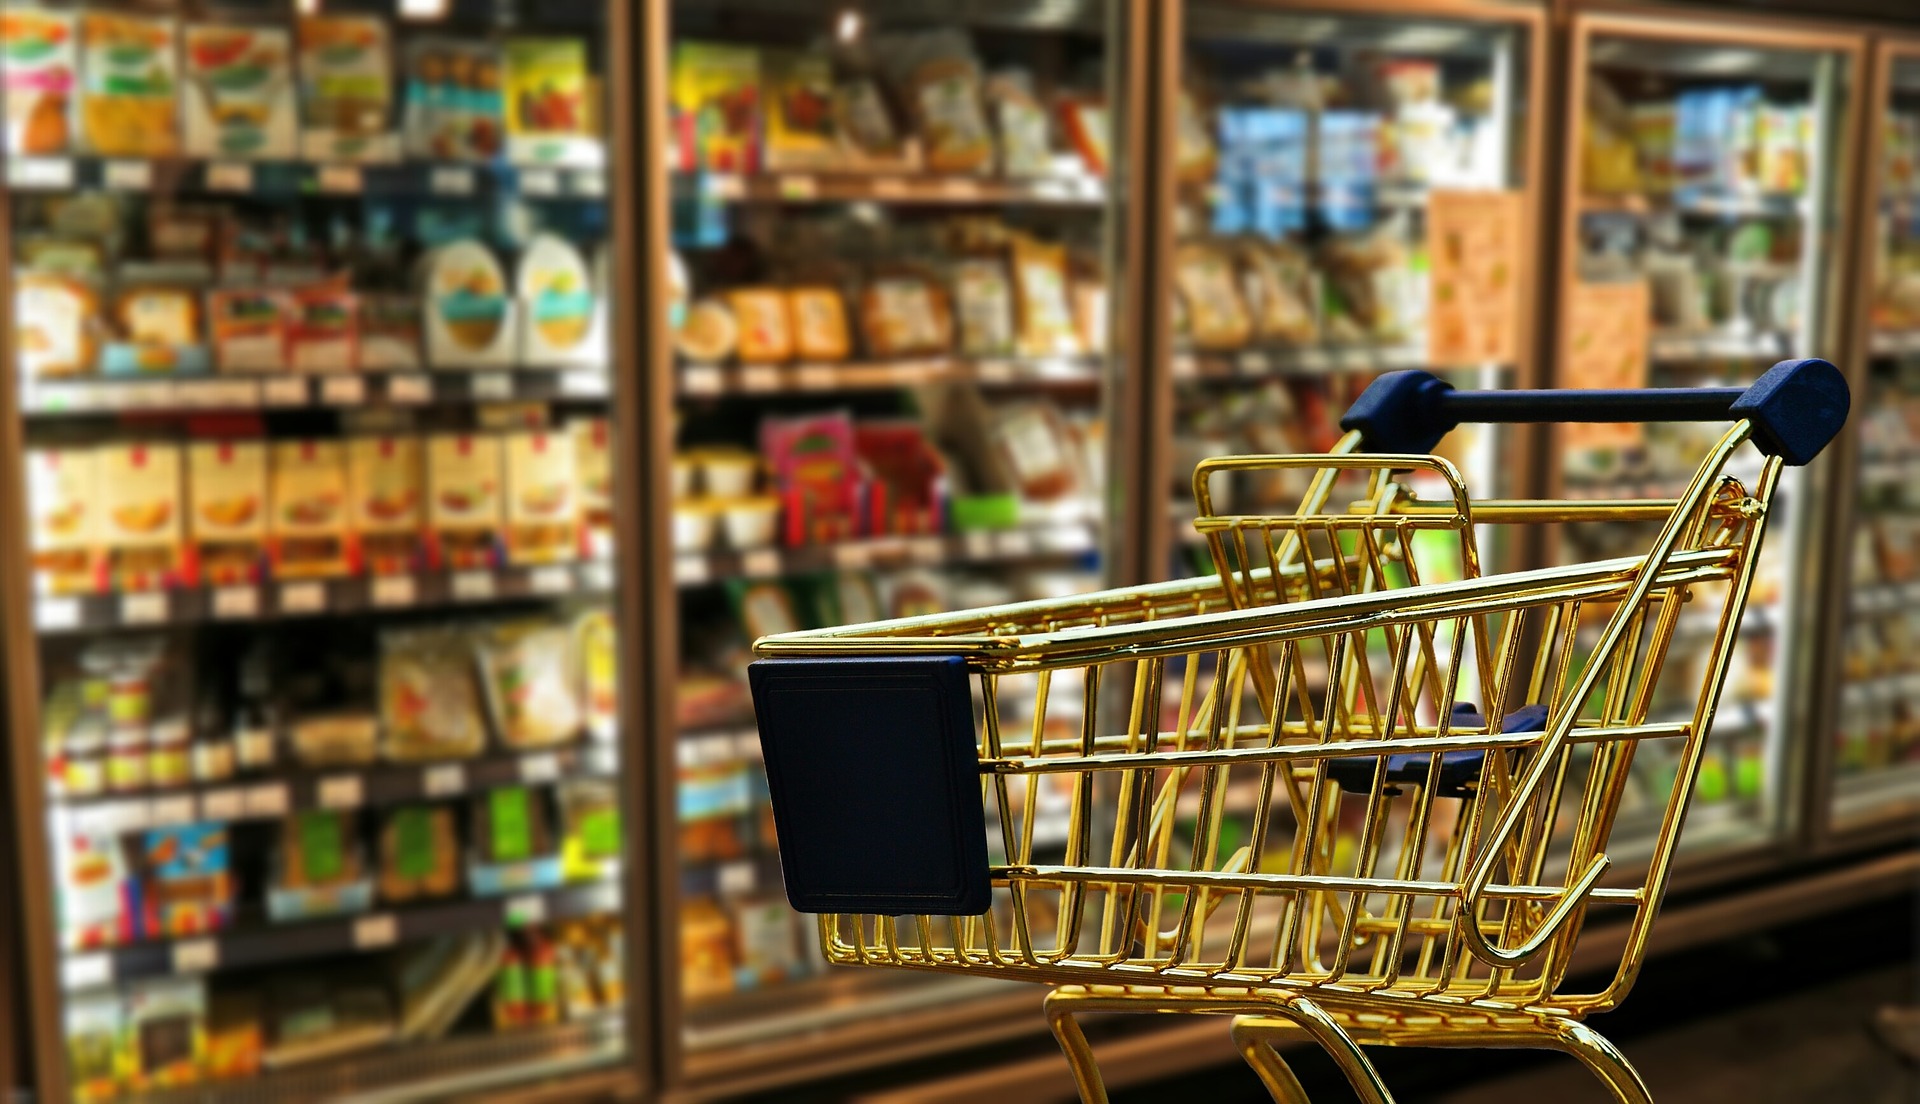 Supermarkets and Hypermarkets in China: A revolution yet to come  |  daxue consulting